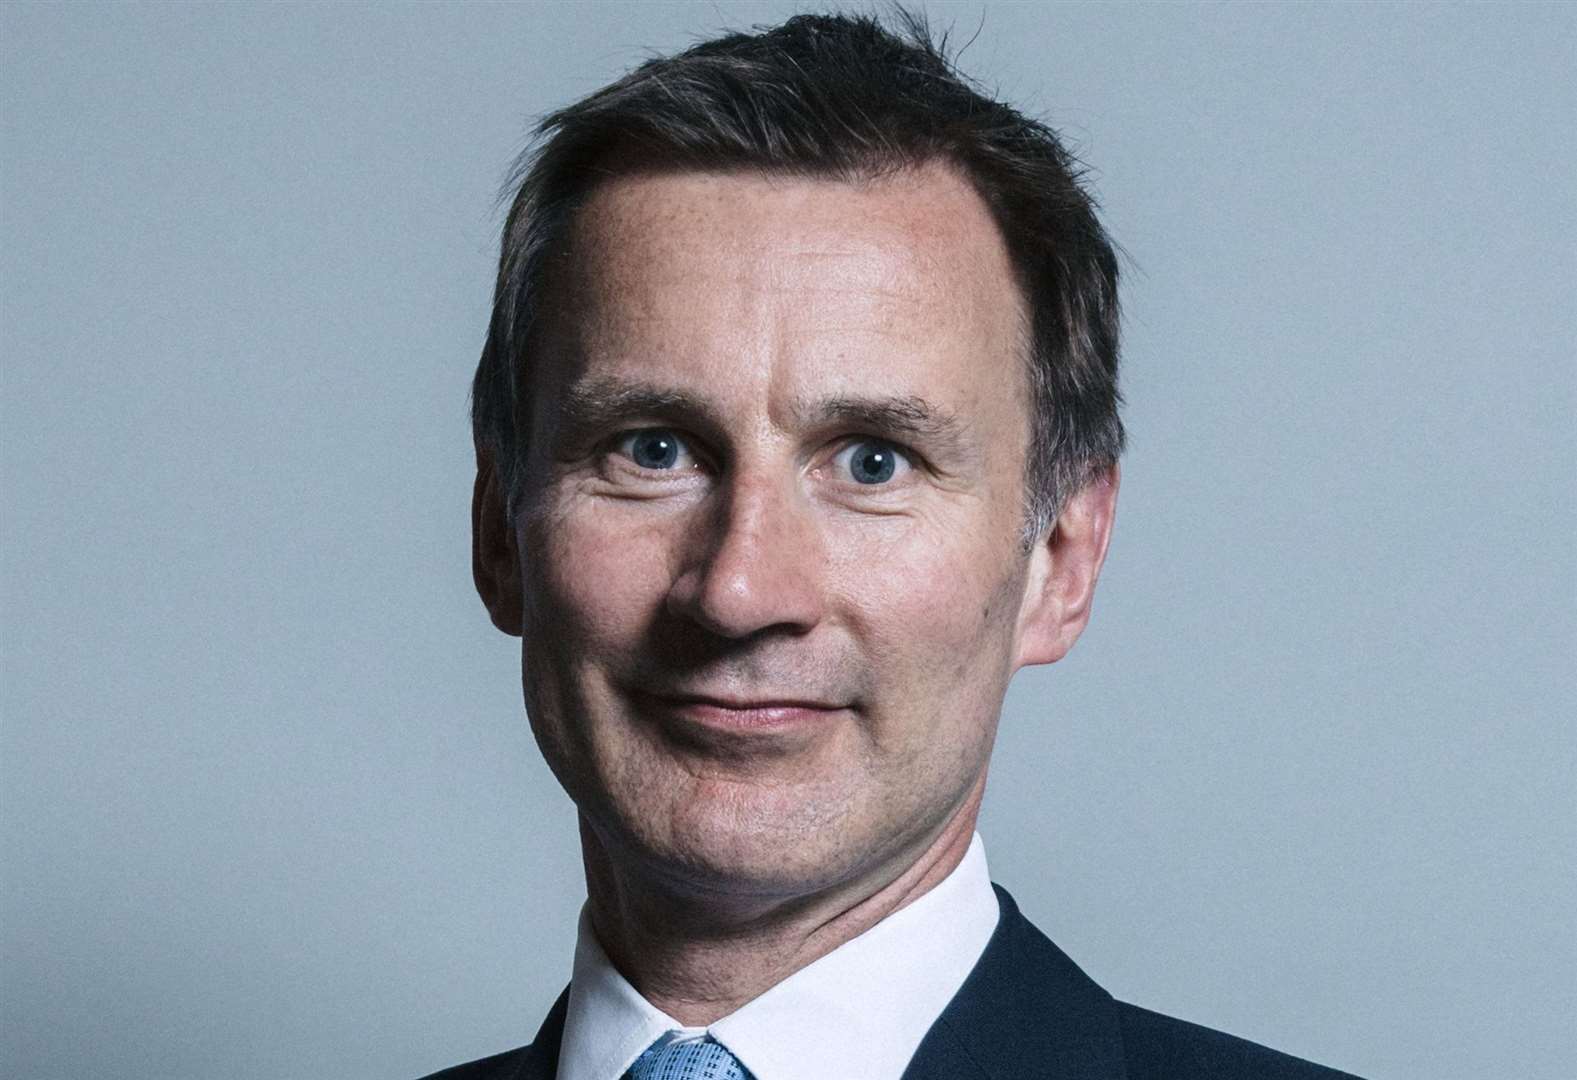 Chancellor Jeremy Hunt says the economy is moving in the right direction